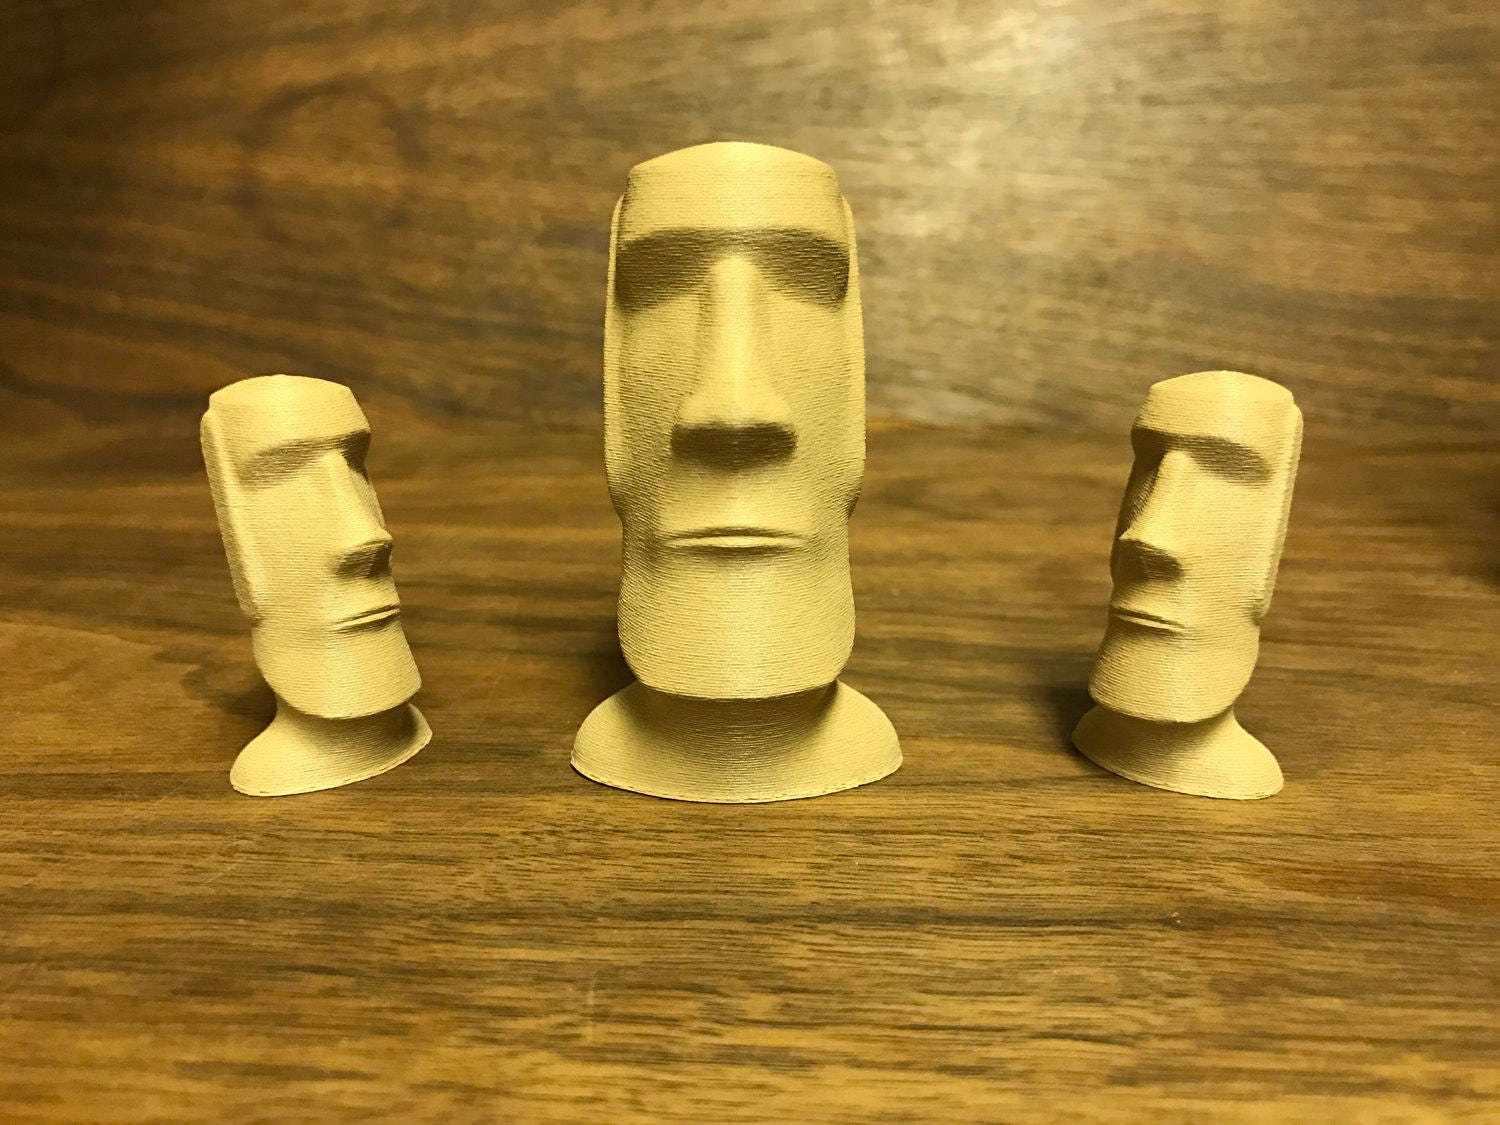 Moai Statue, Mother's Day Gift , Dad Gift, Easter Island, Home Decor,  Office, Desk, Statue, Miniature, Cute, Fun, Geek, History, Nature 